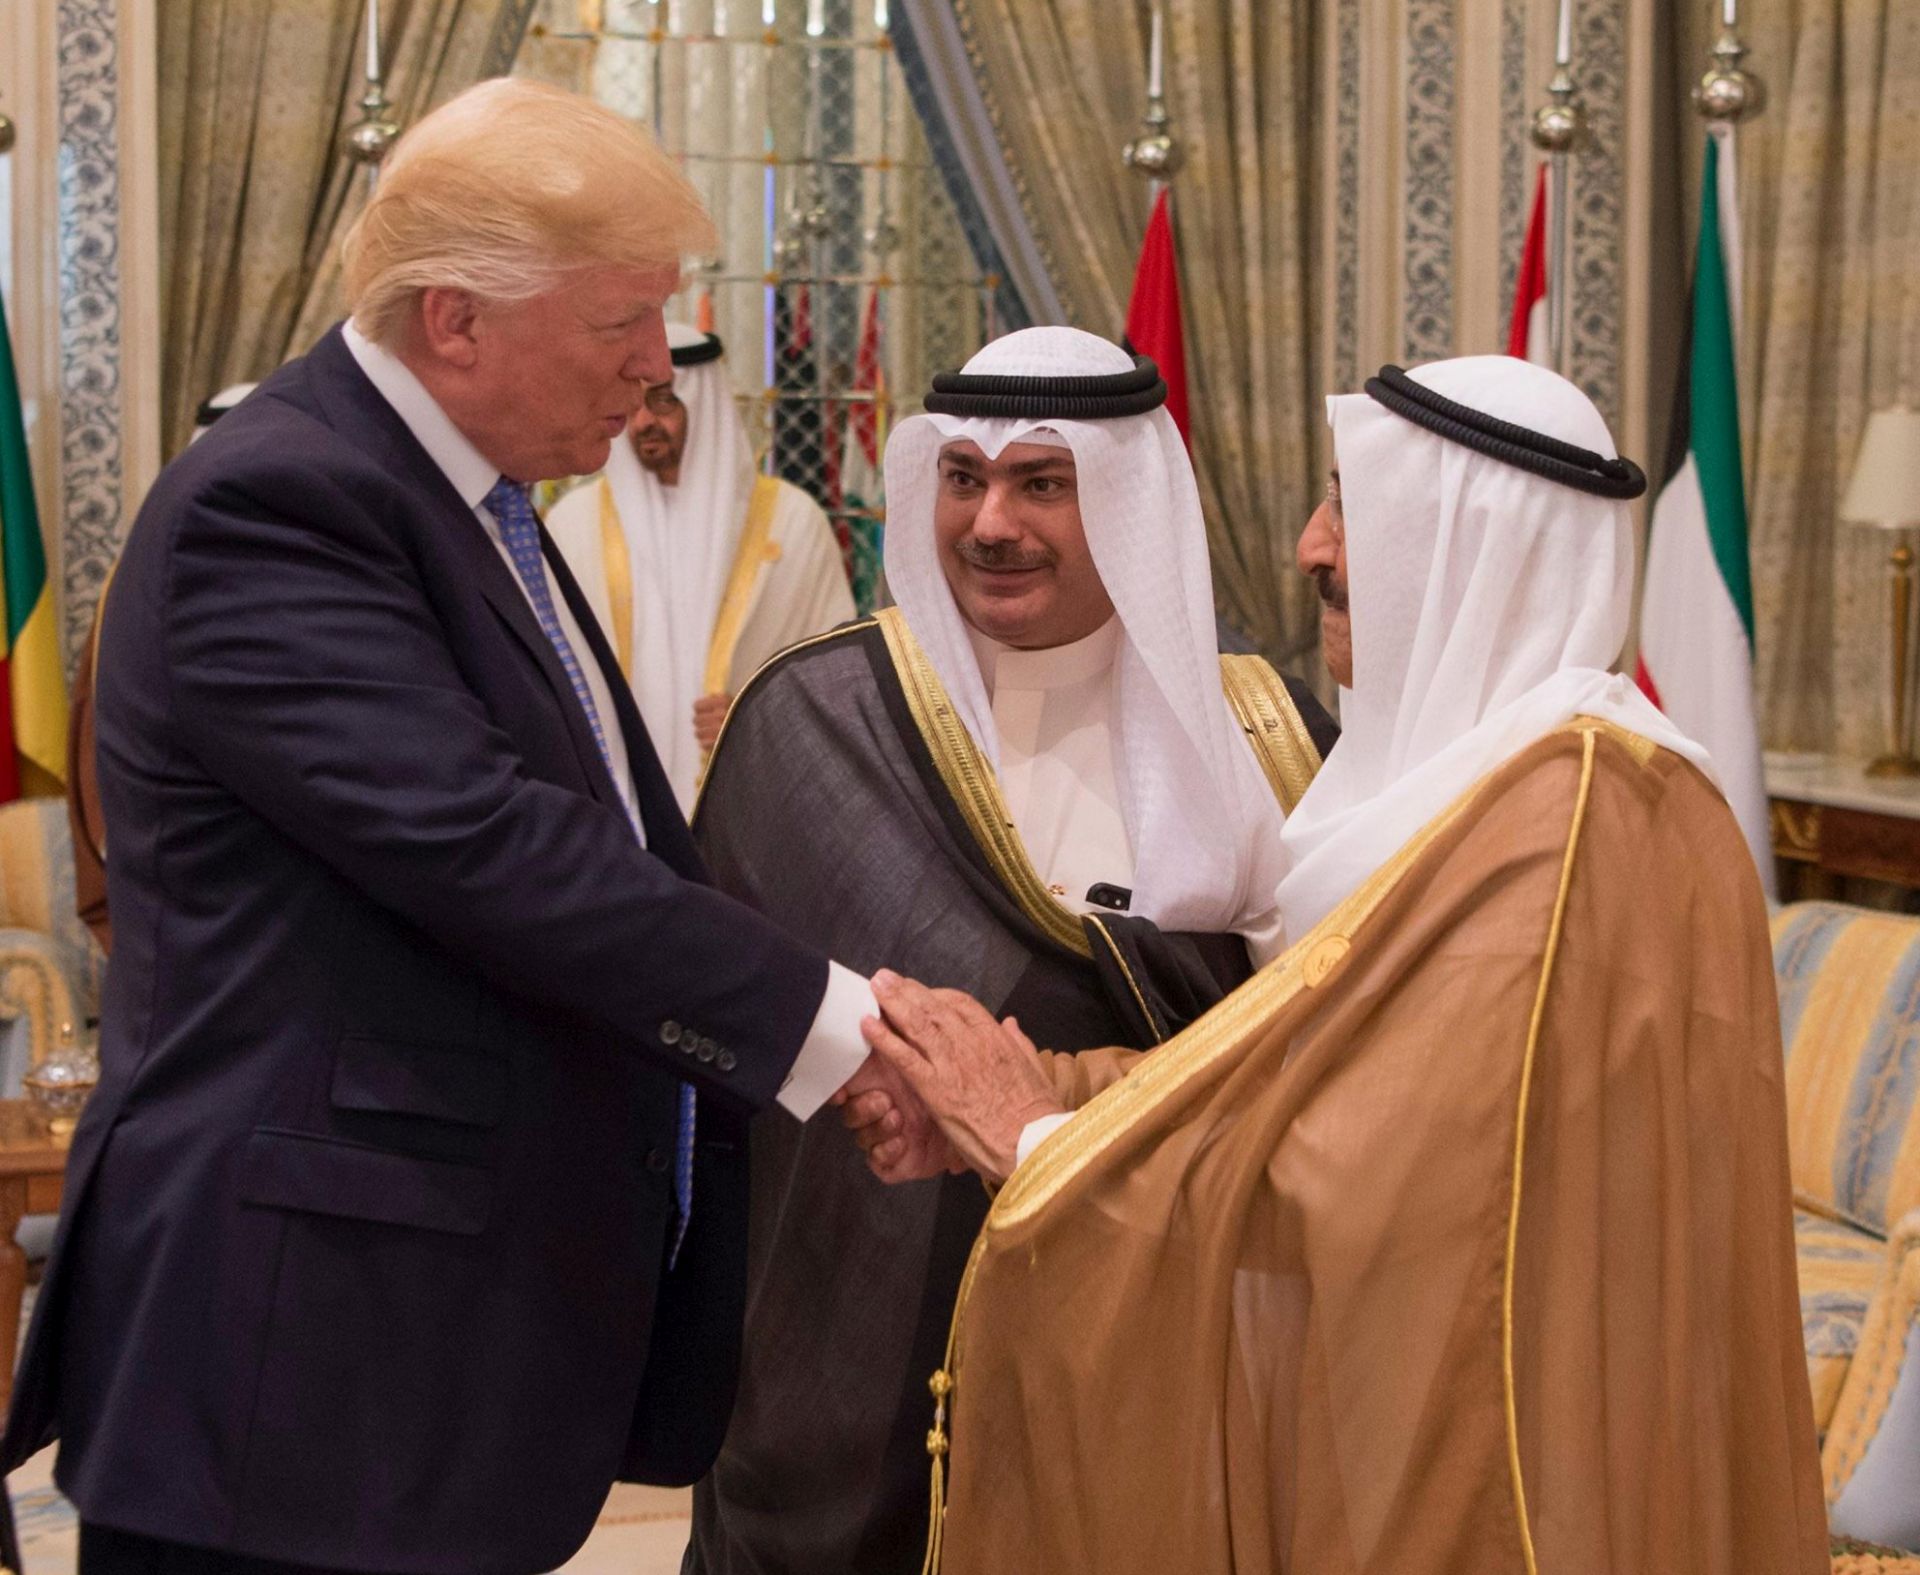 epa05979101 A handout photo made available by the Saudi Press Agency (SPA) shows Emir of Kuwait Sheikh Sabah al-Ahmad al-Sabah (R) shaking hands with US President Donald J. Trump during the opening session of the Gulf Cooperation Council summit (GCC), in Riyadh, Saudi Arabia, 21 May 2017. The GCC is attended by the leaders of Kuwait, Bahrain, Qatar, the Crown Prince of Abu Dhabi, deputy Prime Minister of Oman, and the US President.  EPA/SAUDI PRESS AGENCY HANDOUT  HANDOUT EDITORIAL USE ONLY/NO SALES